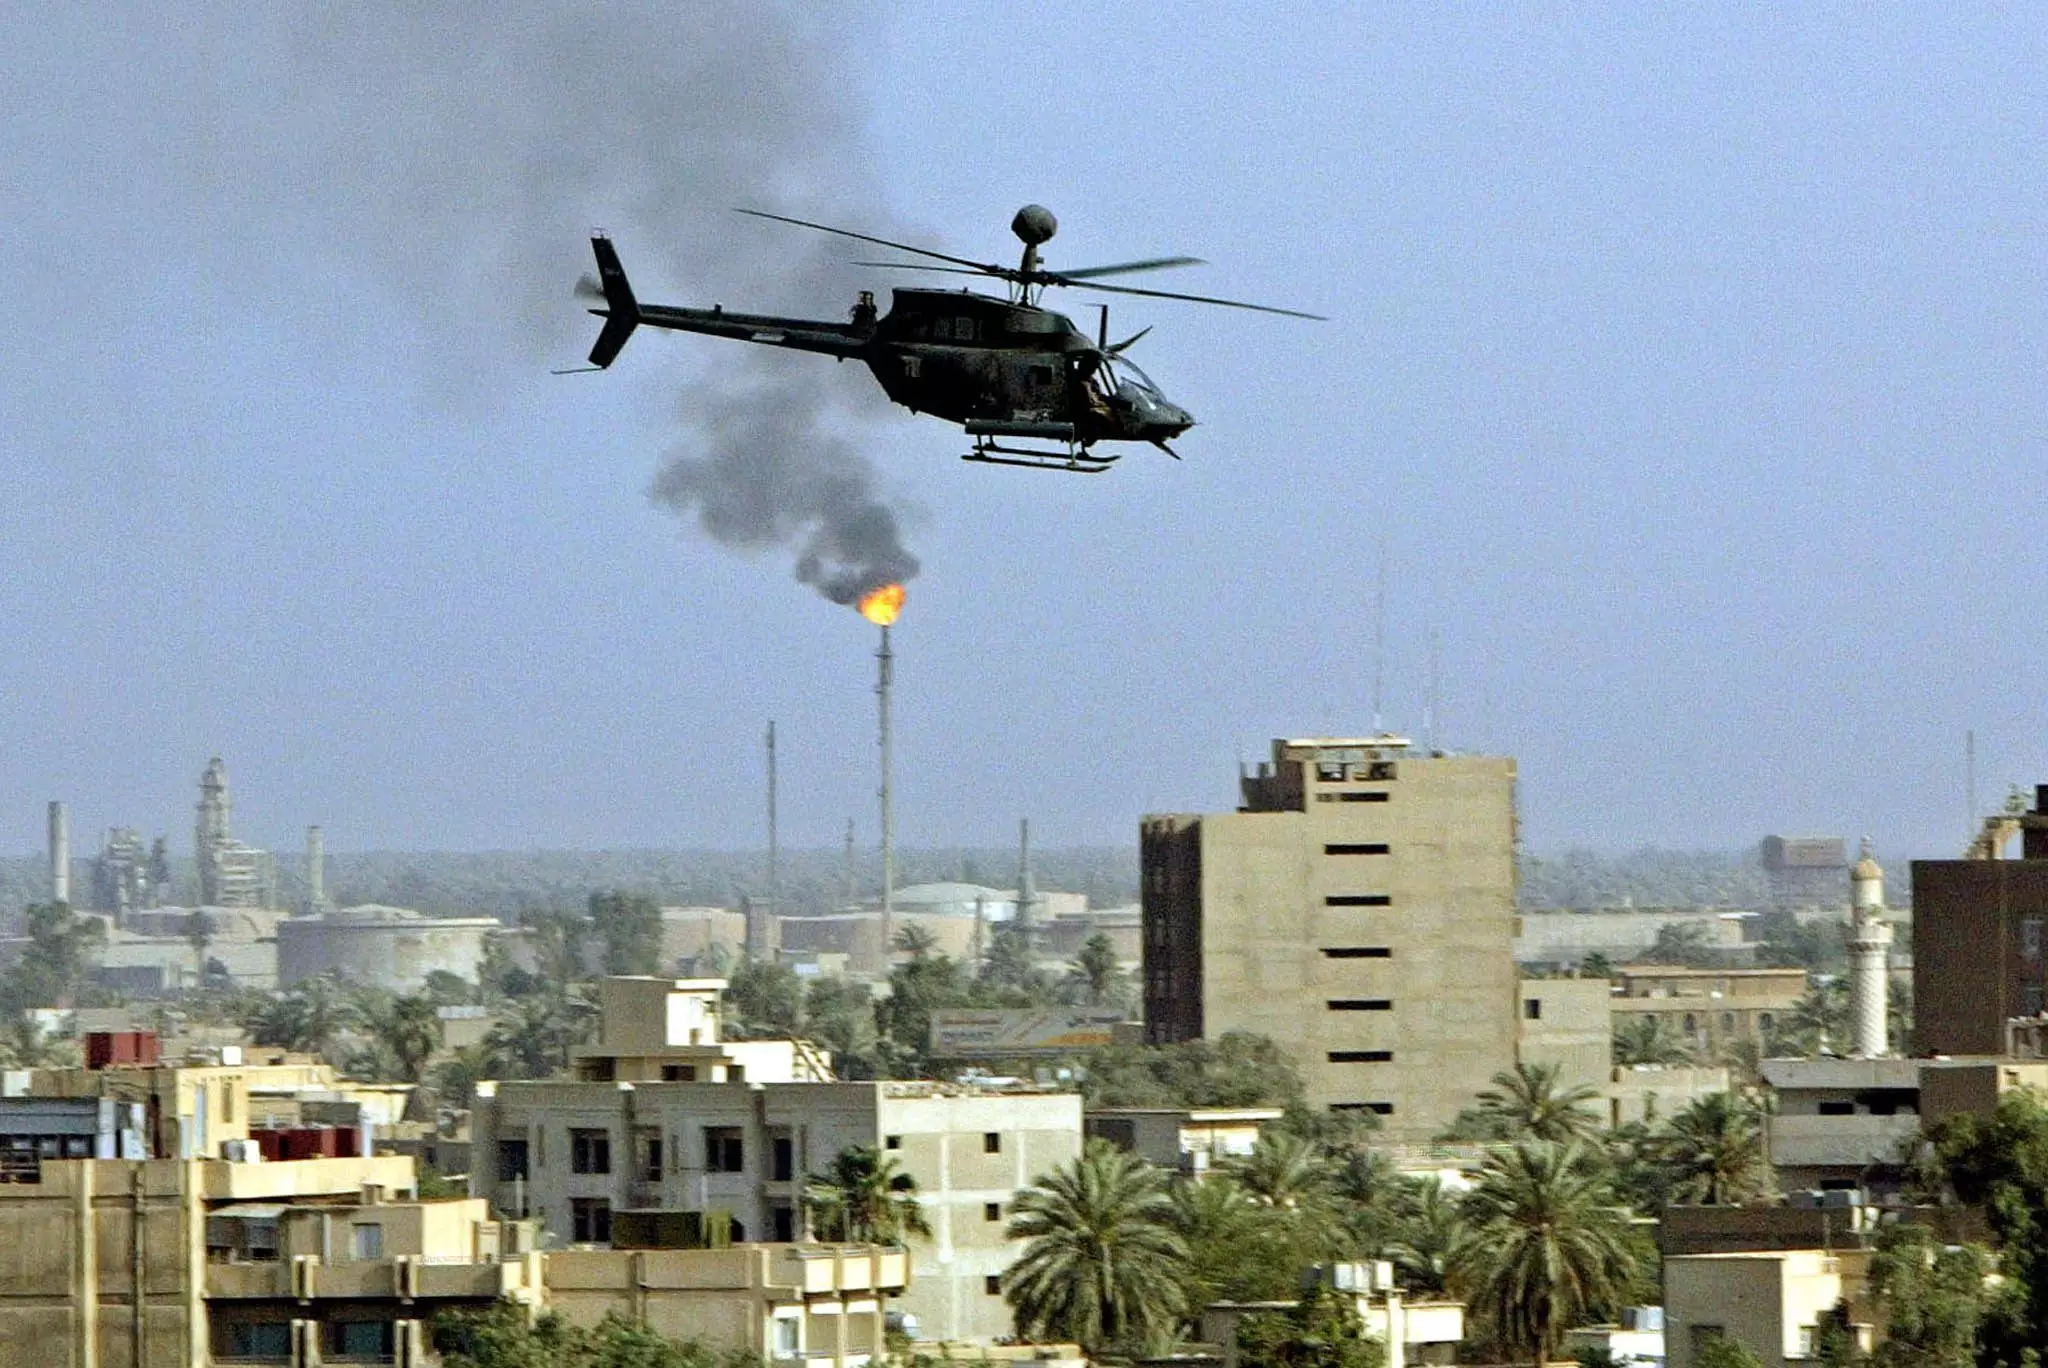 A British Army helicopter during the Iraq War.